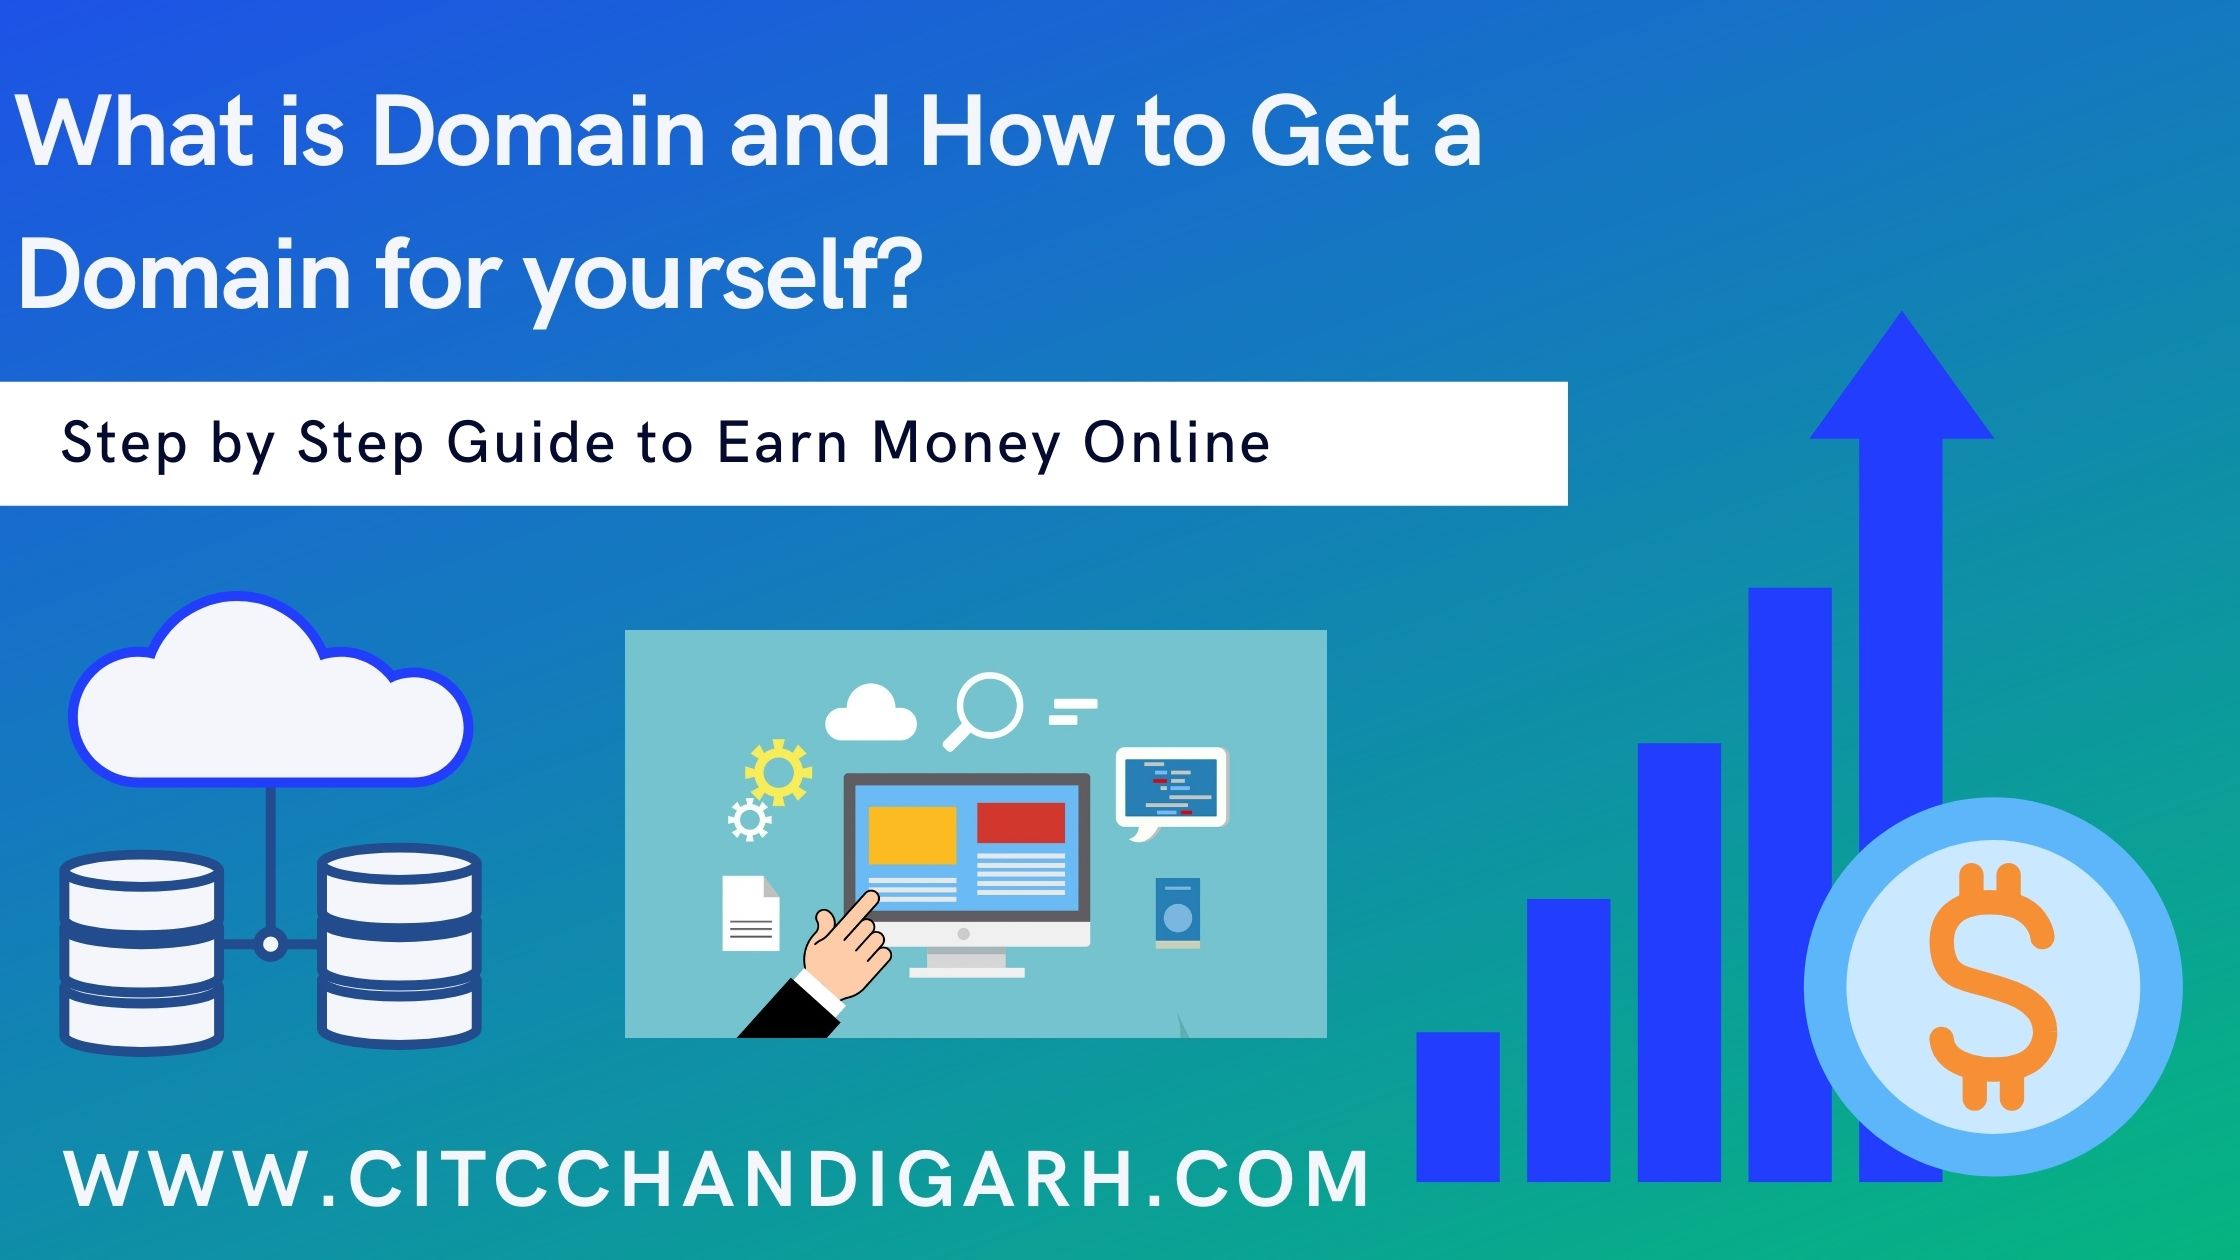 What is Domain and How to Get a Domain for yourself?